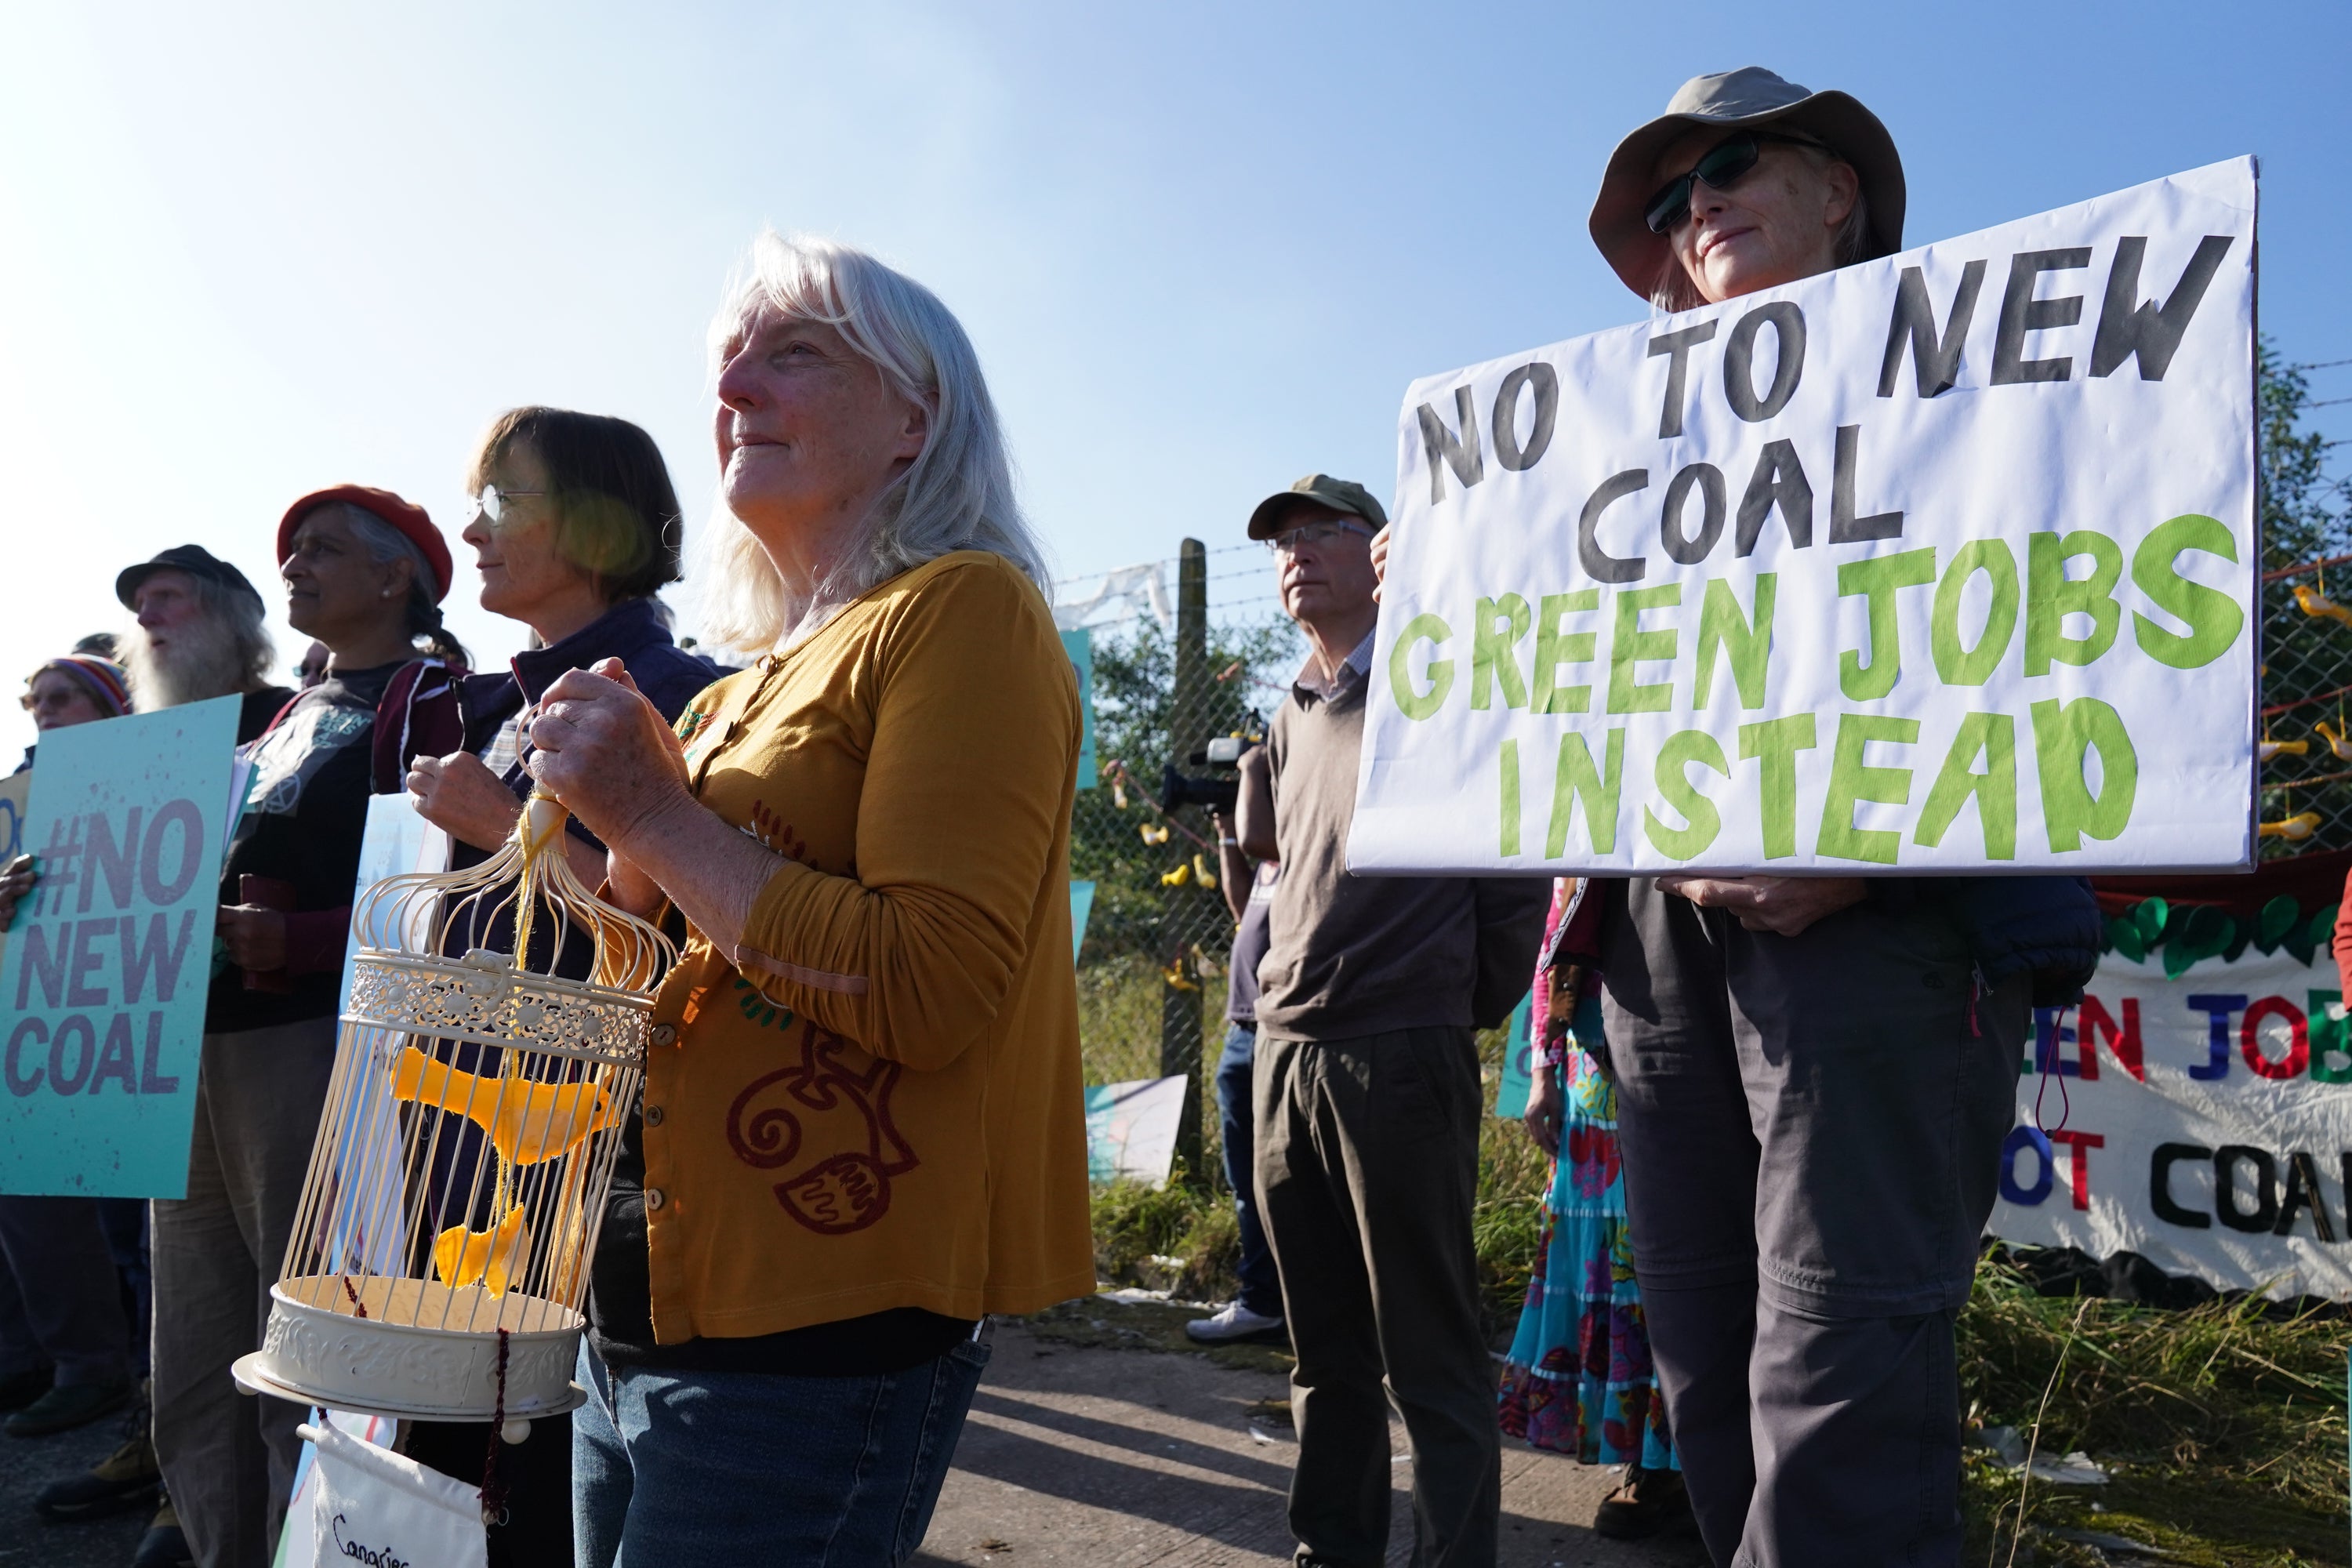 Demonstrators outside the proposed Woodhouse Colliery, south of Whitehaven. (Owen Humphreys/PA)